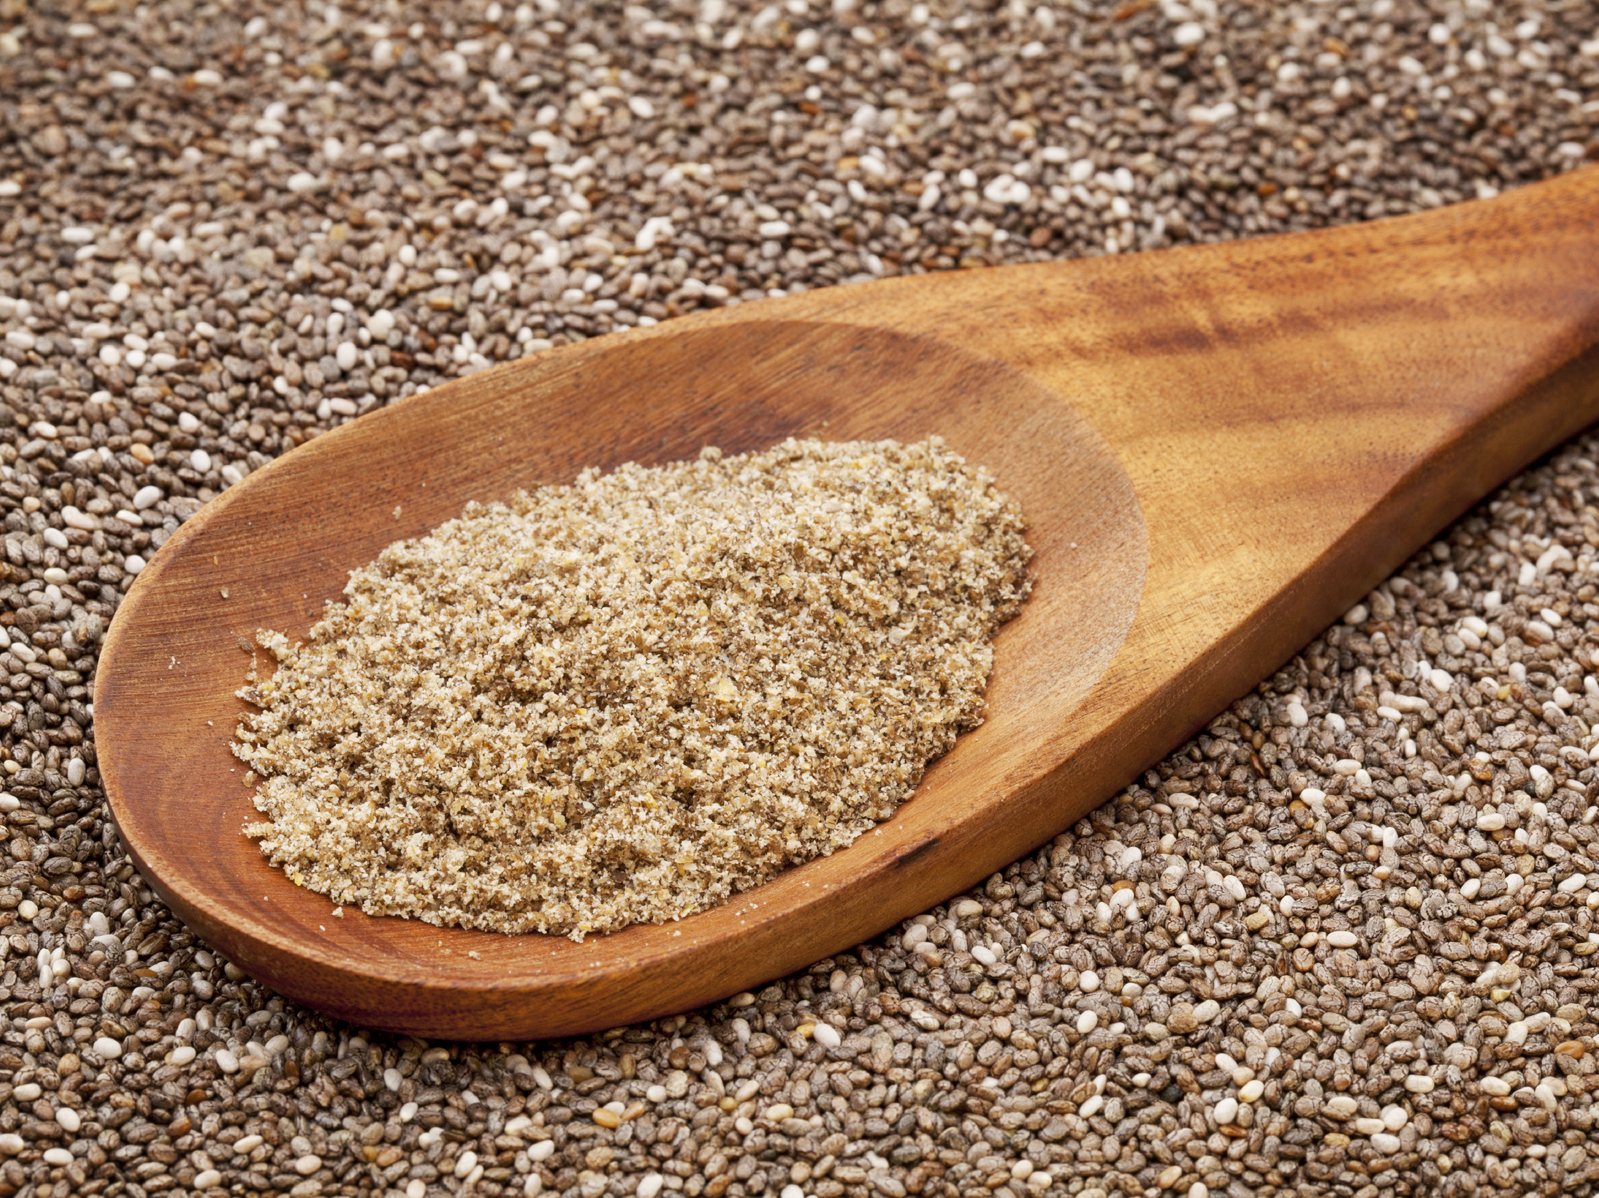 Salmonella has recently been found in ground chia seed powder, a superfood being put in everything from smoothies to cereal. Photo: Marek Uliasz/iStockphoto